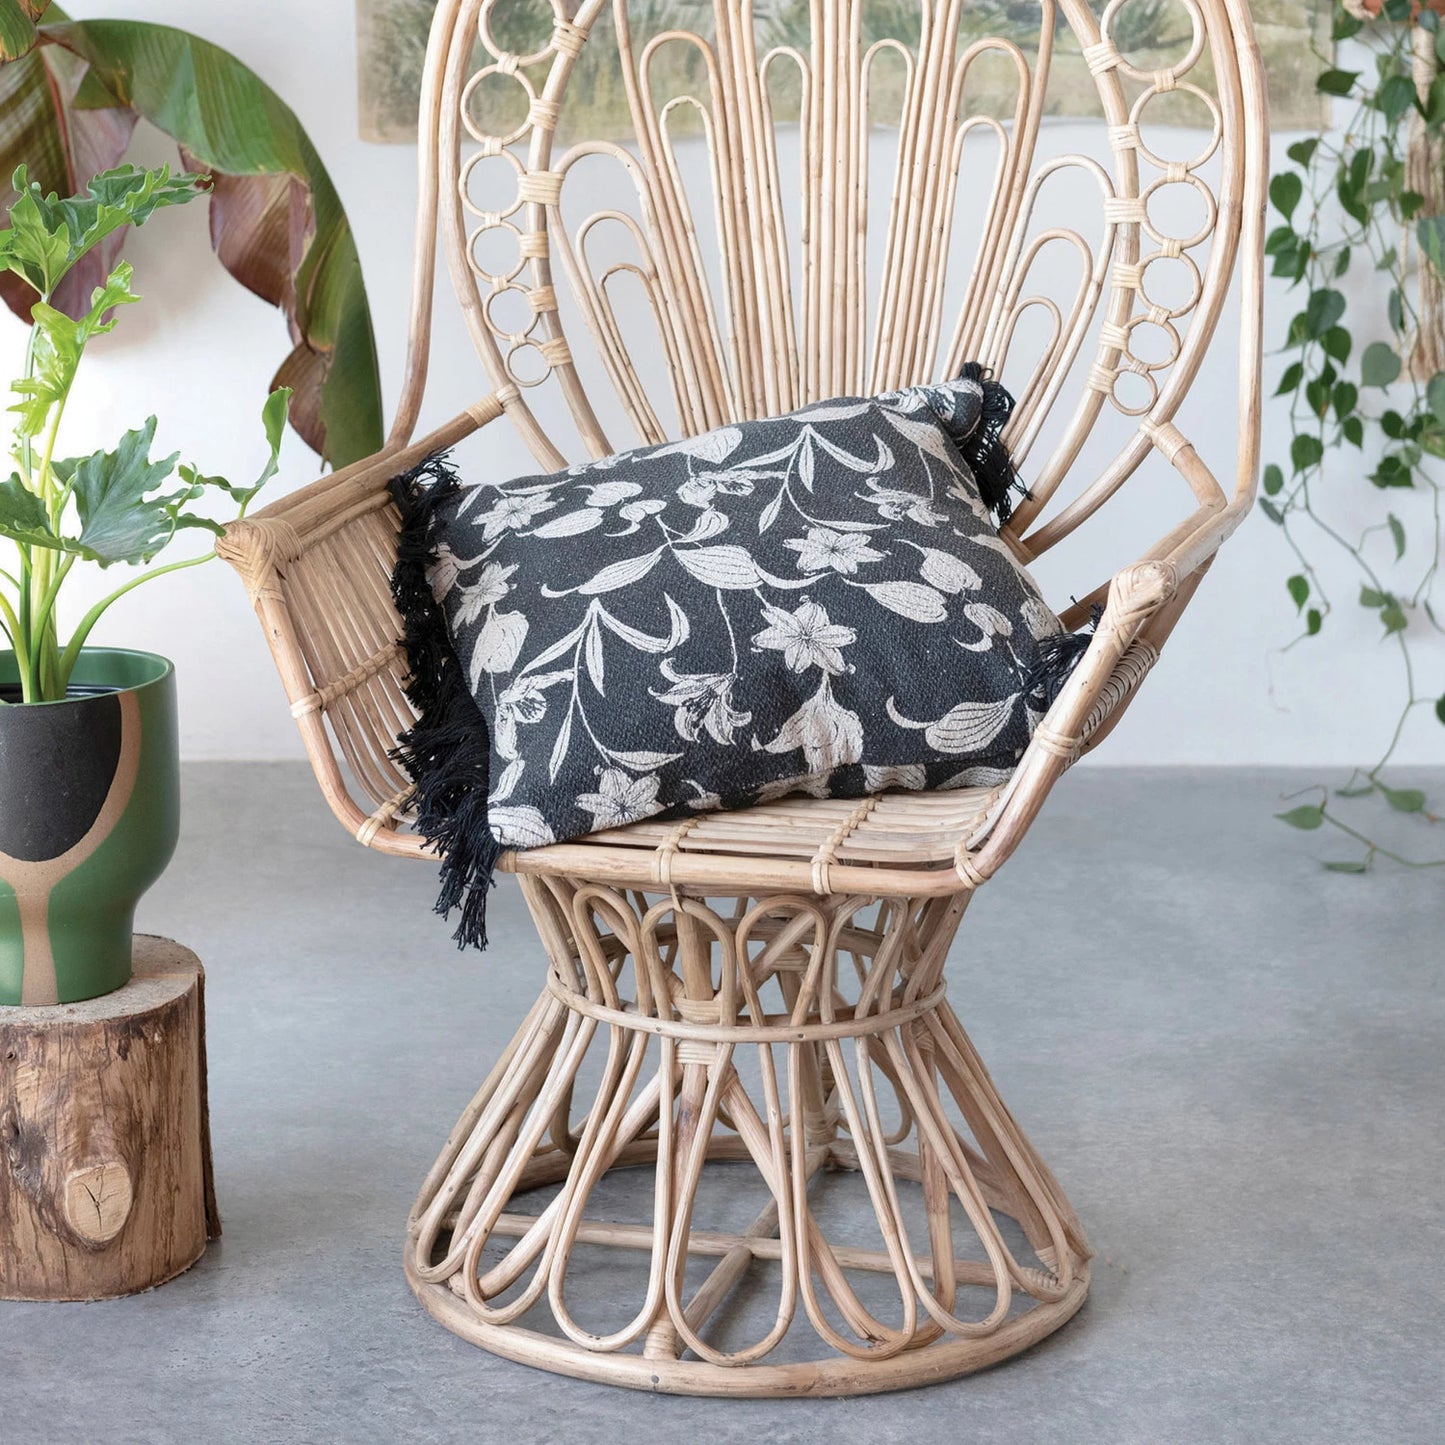 Black and Cream Floral Pillow with Fringe